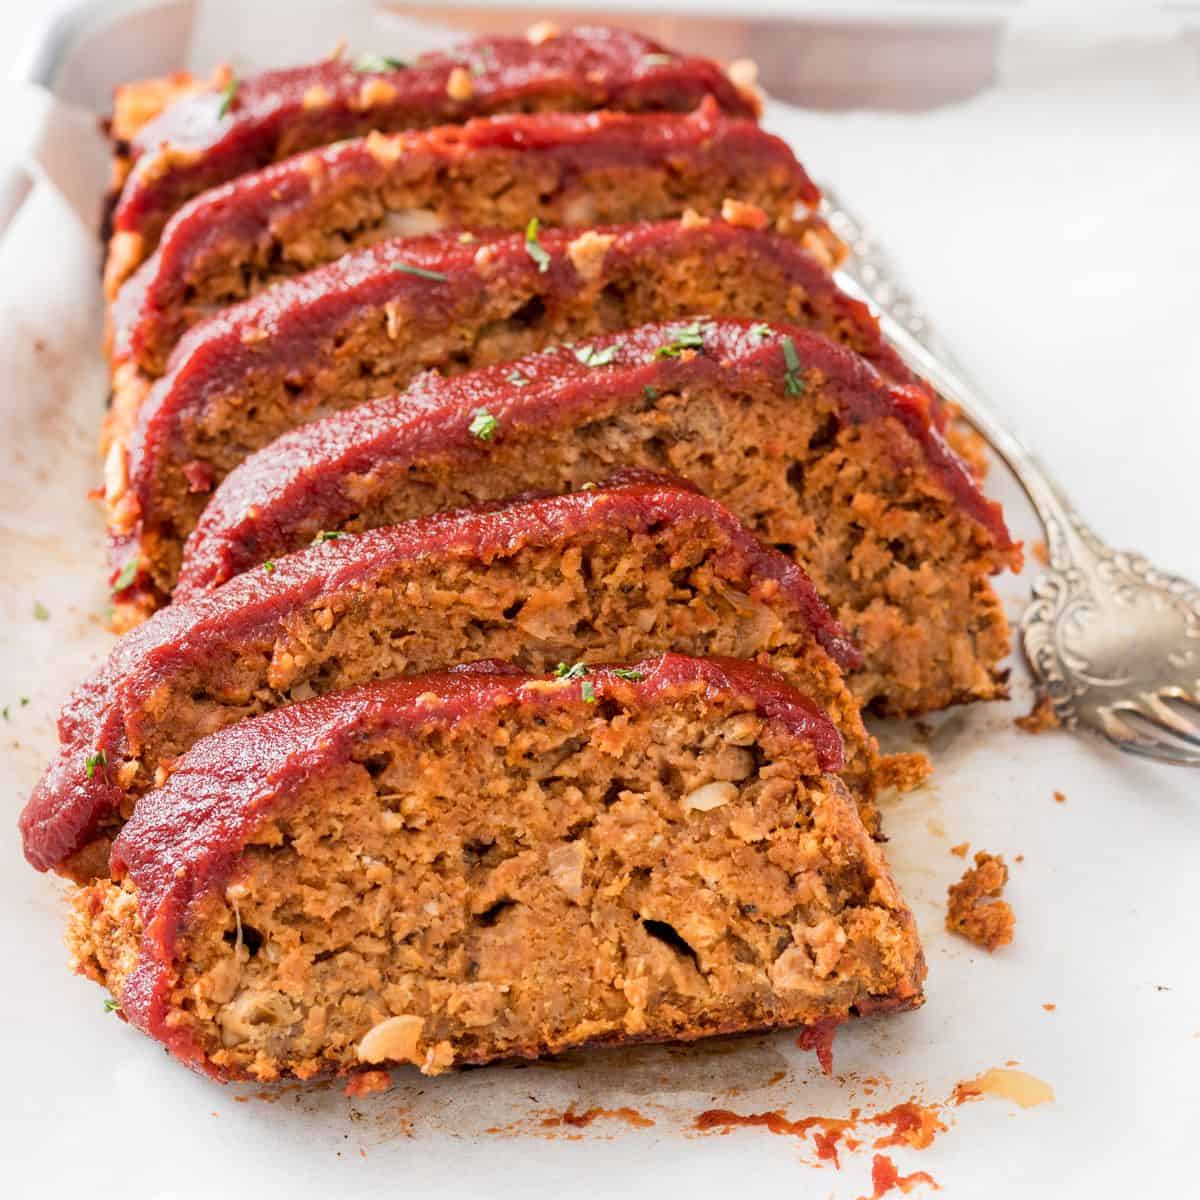 Classic Beyond Meat Meatloaf with JUST Egg